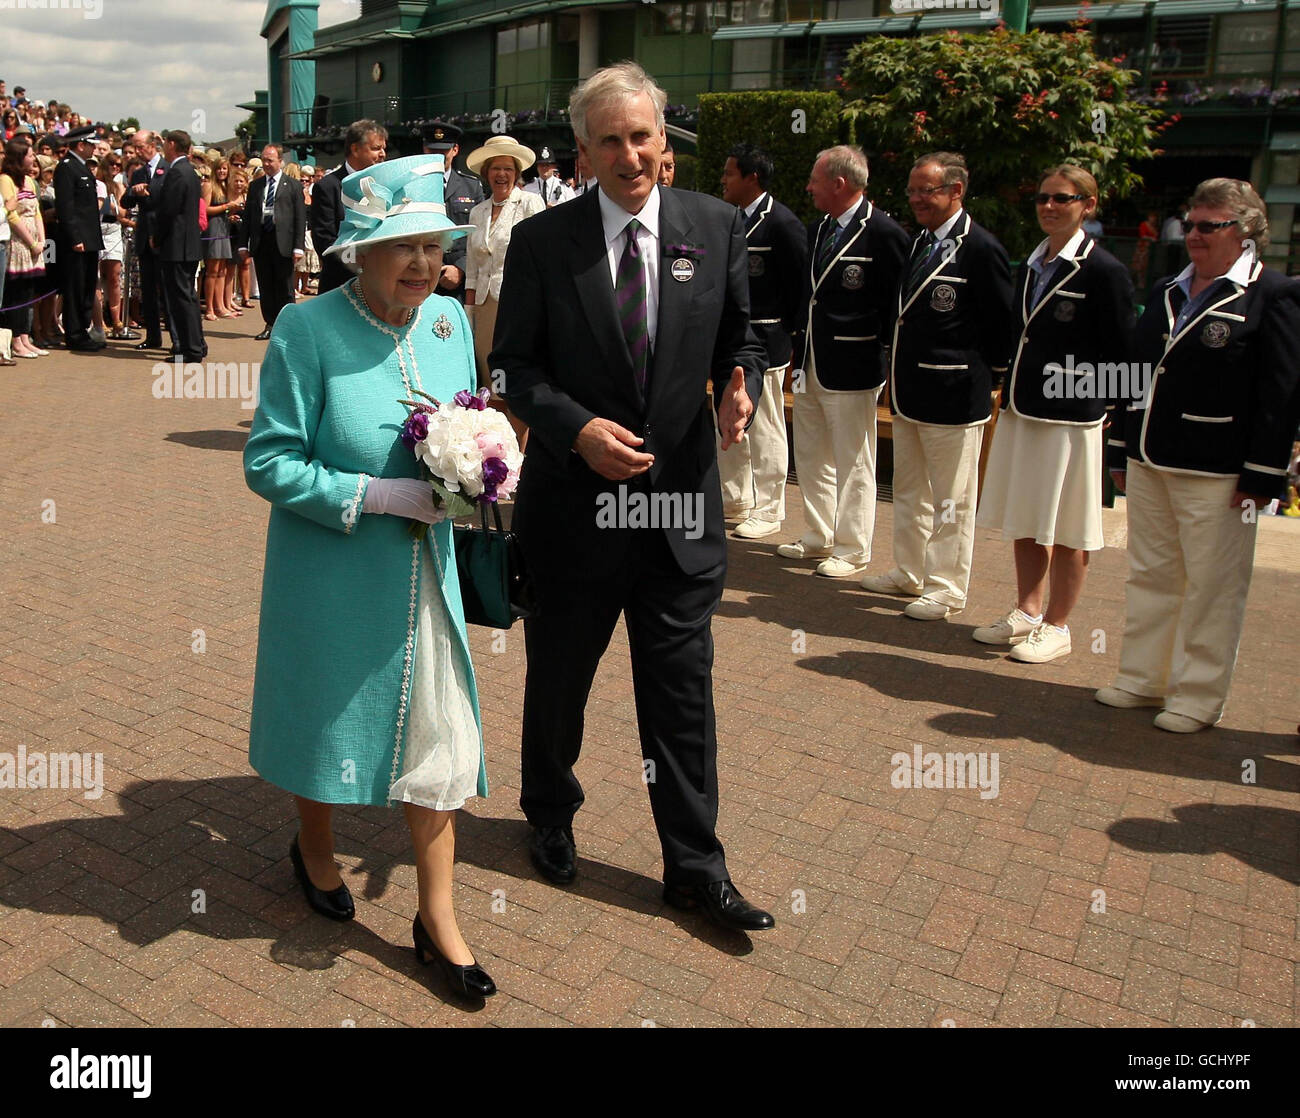 Britain's Queen Elizabeth II arrives at Wimbledon during day four of the 2010 Wimbledon Championships at the All England Lawn Tennis Club, Wimbledon. Stock Photo